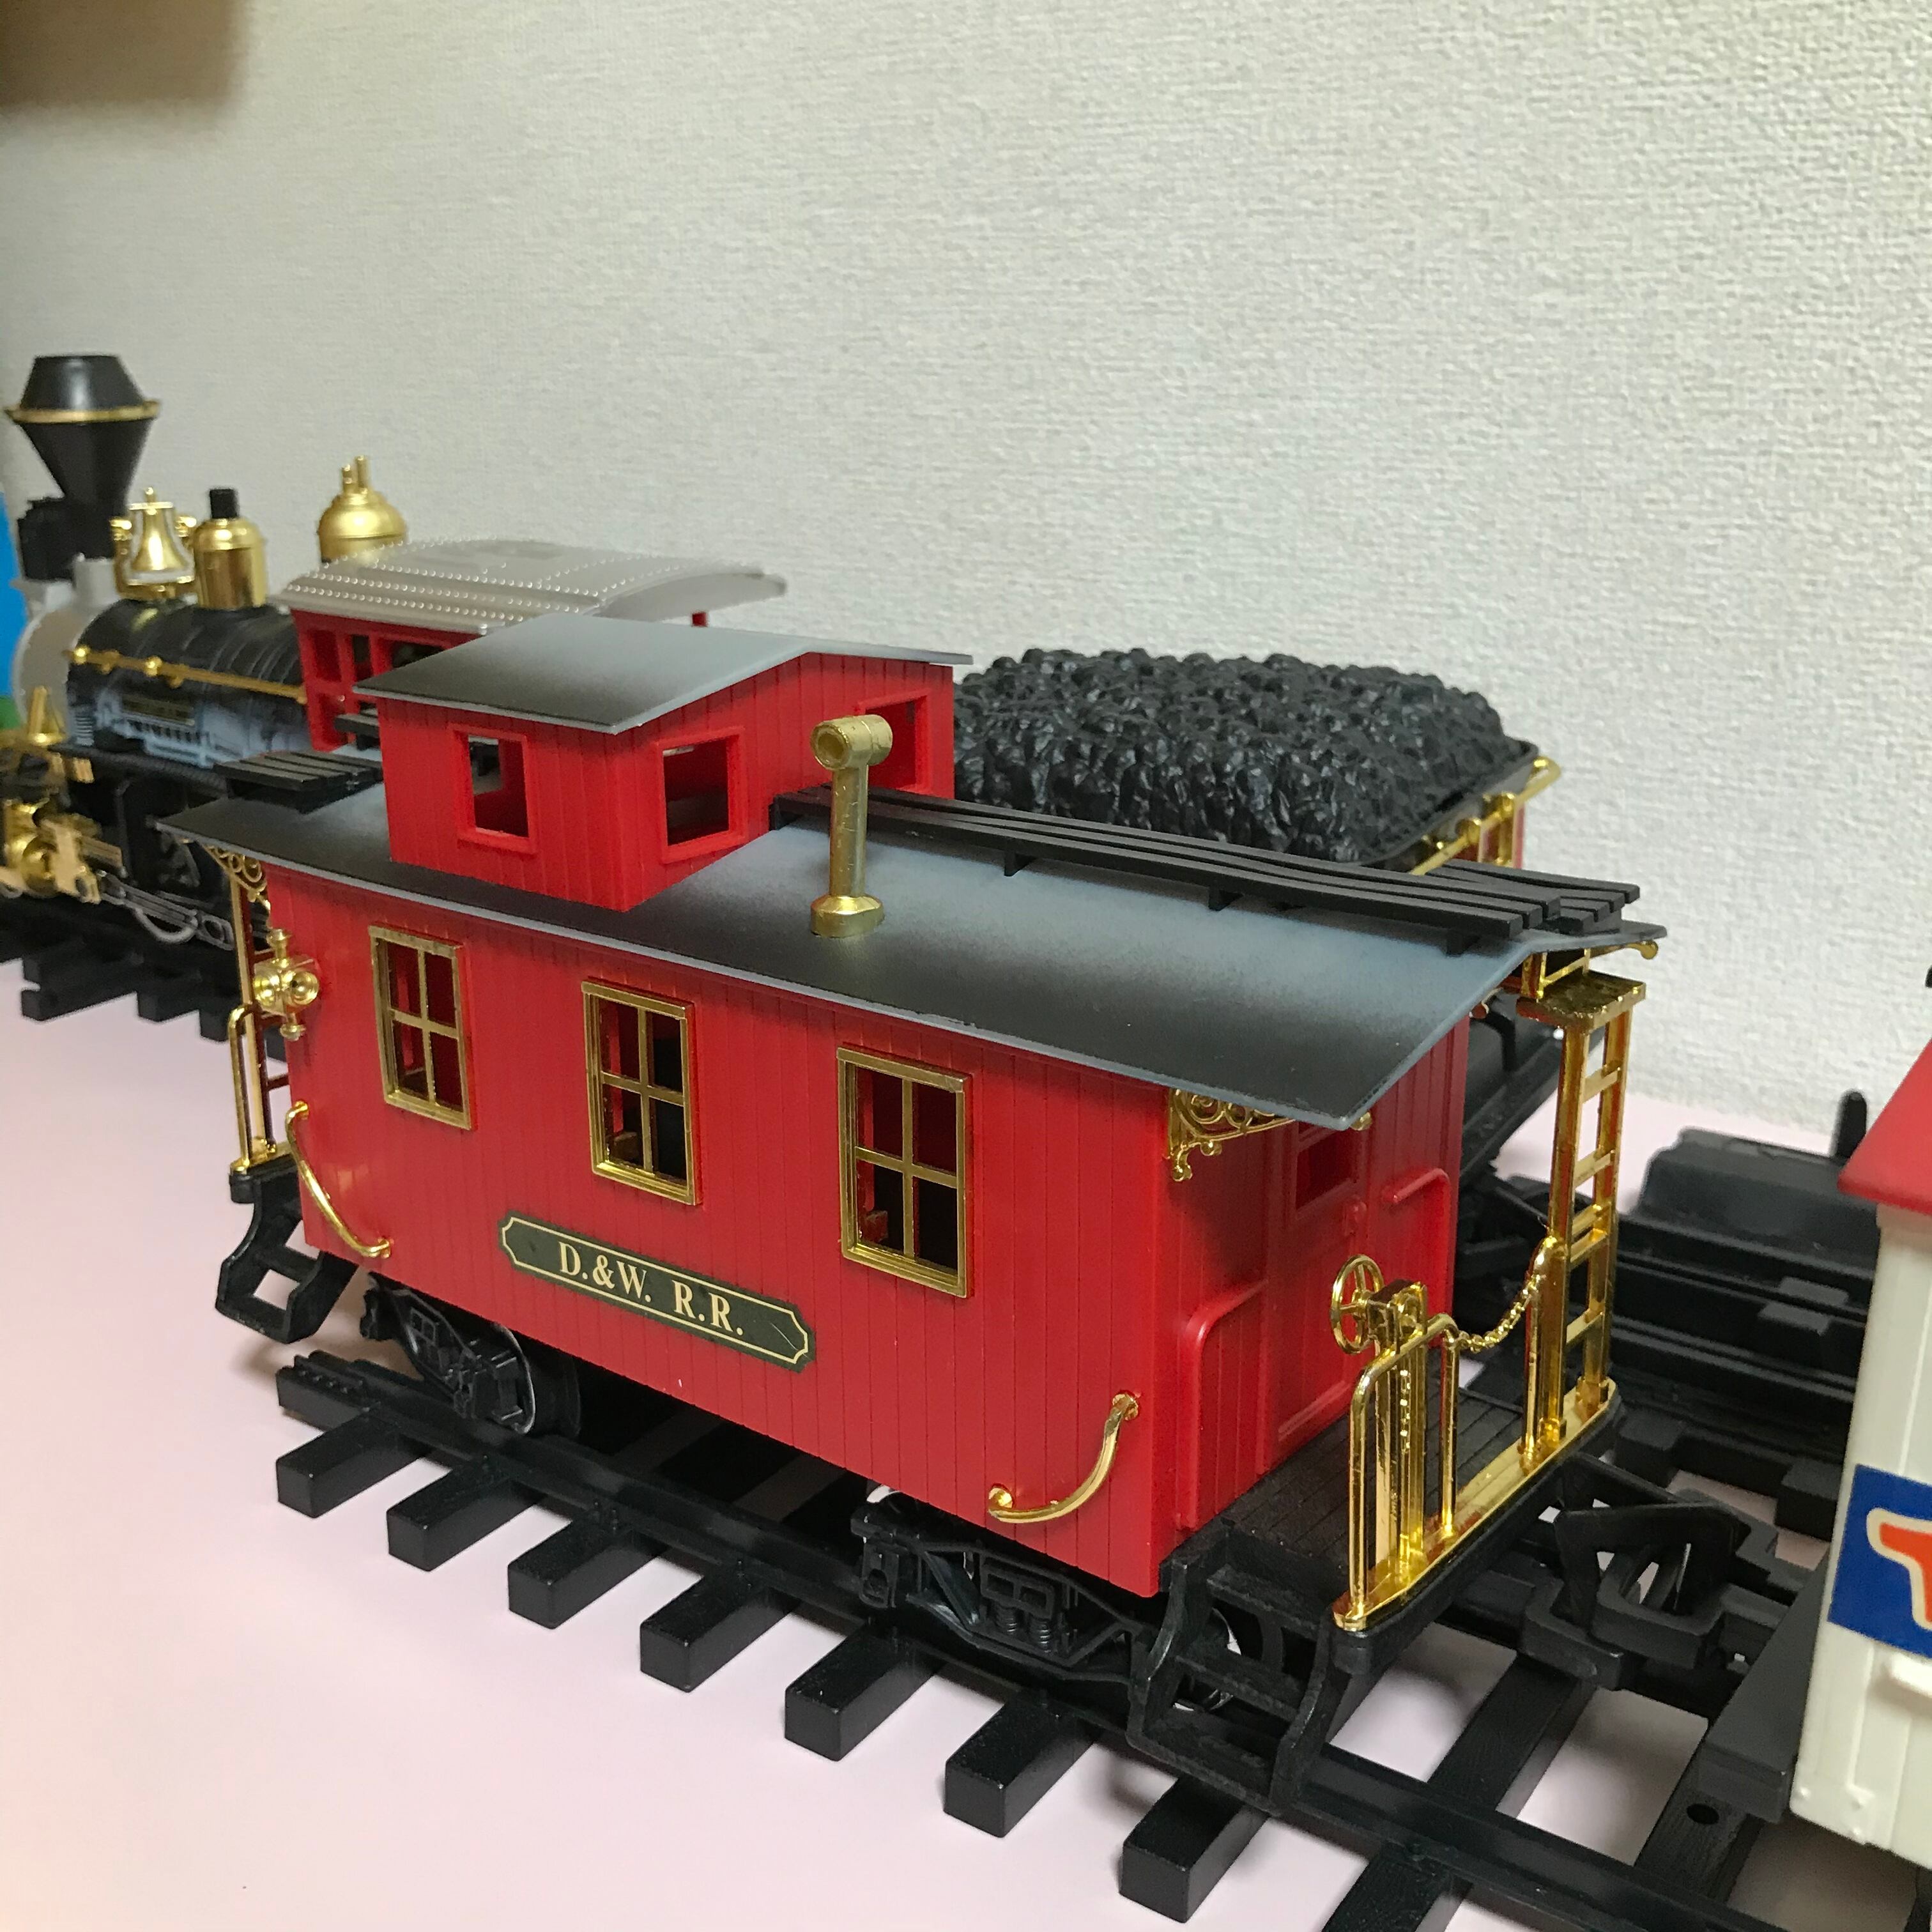 1980’s THE GREAT AMERICAN EXPRESS RAILROAD COMPANY トイザらス ヴィンテージ アメリカントイ